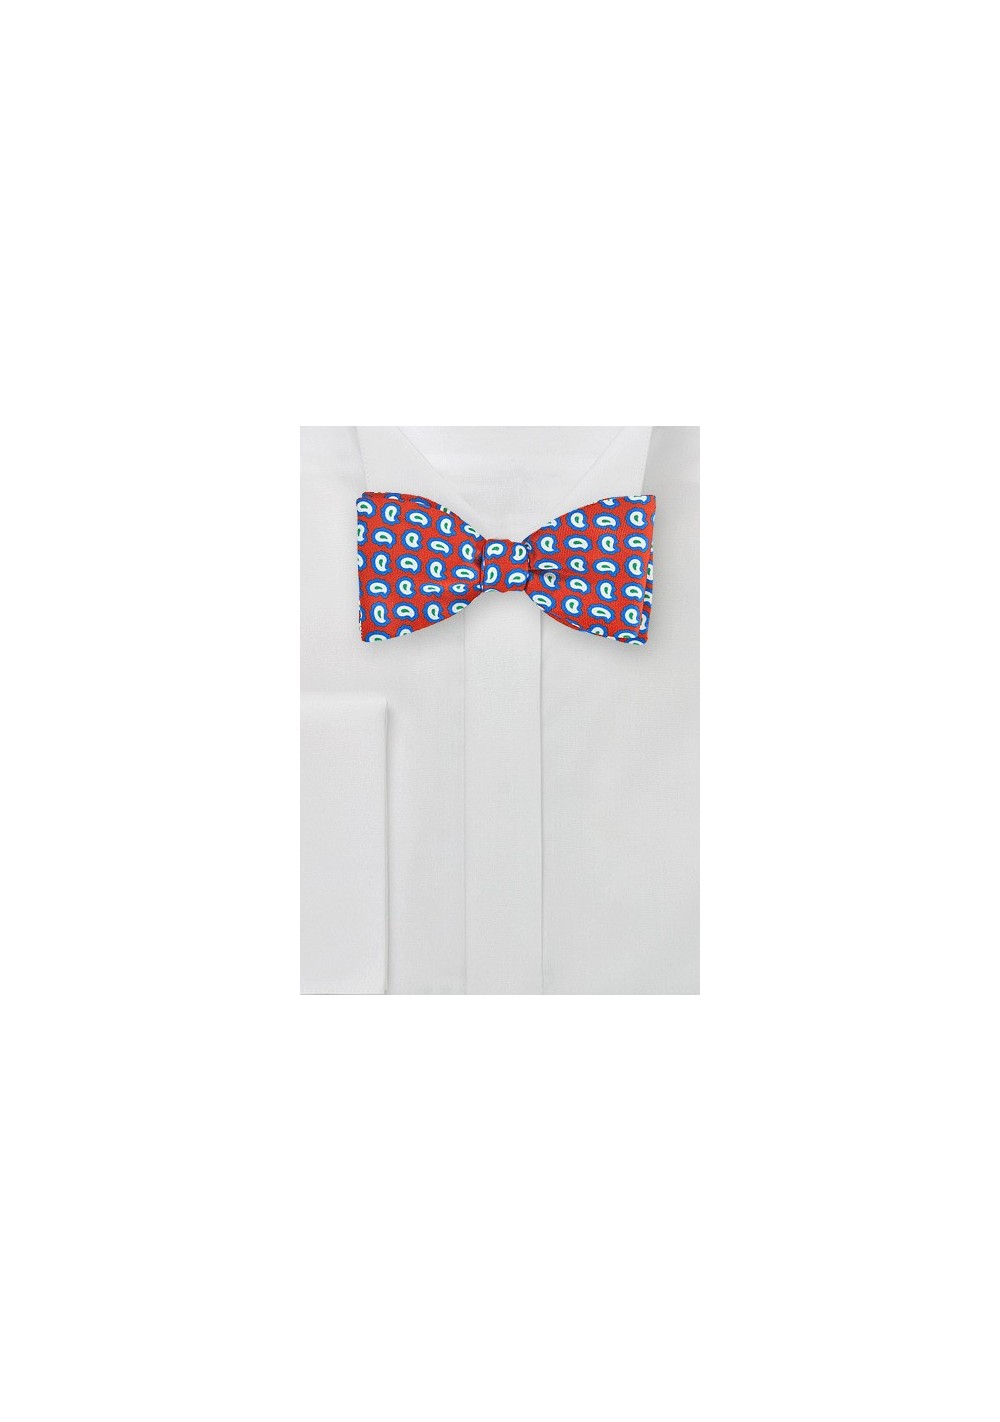 Pop Art Paisley Bow Tie in Red, Blue, White